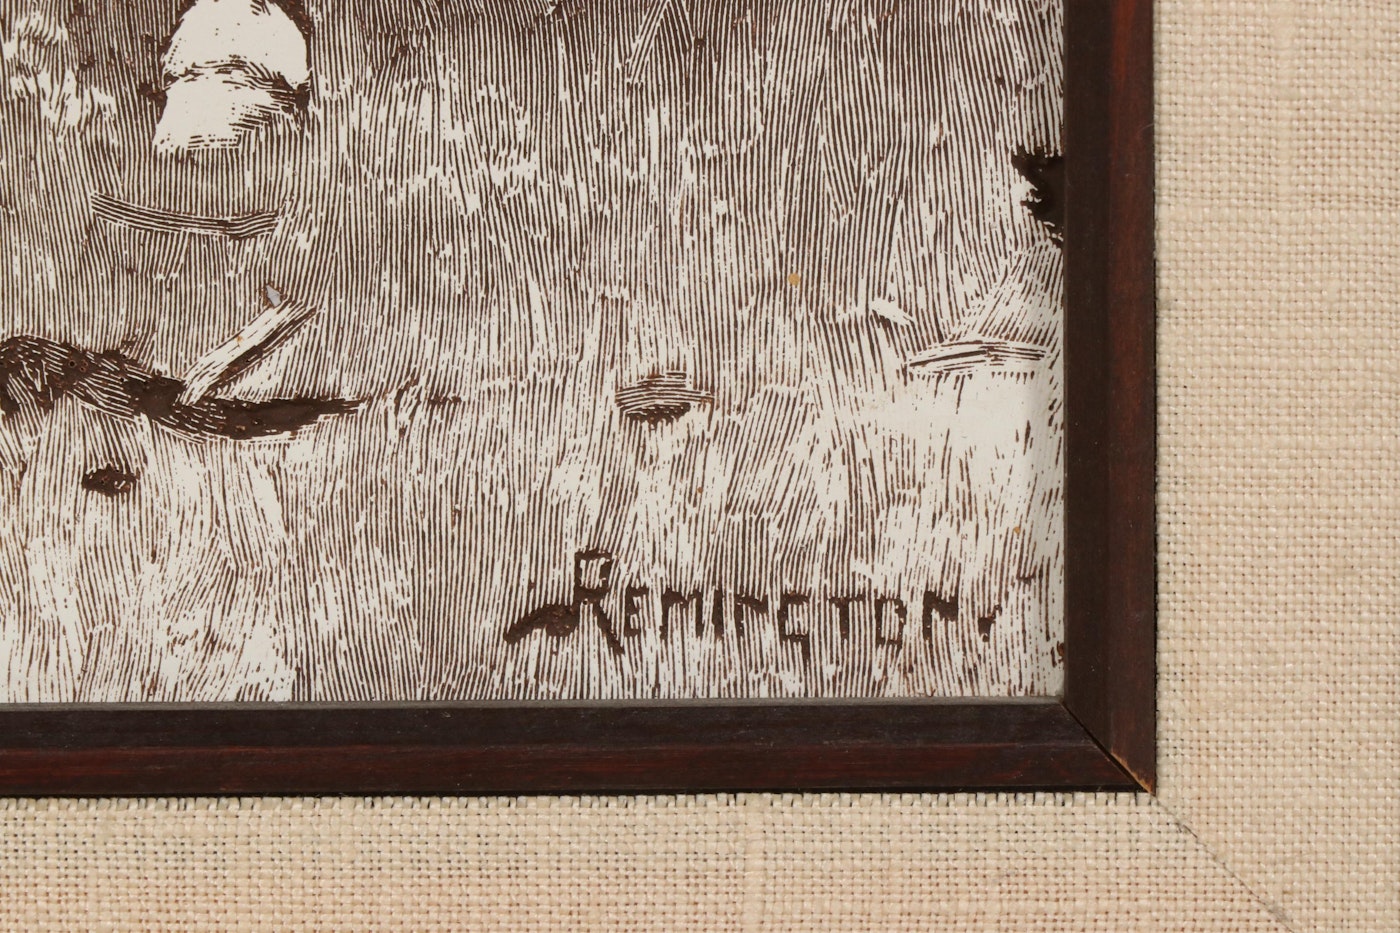 Etched Relief Printing Plate after Frederic Remington | EBTH